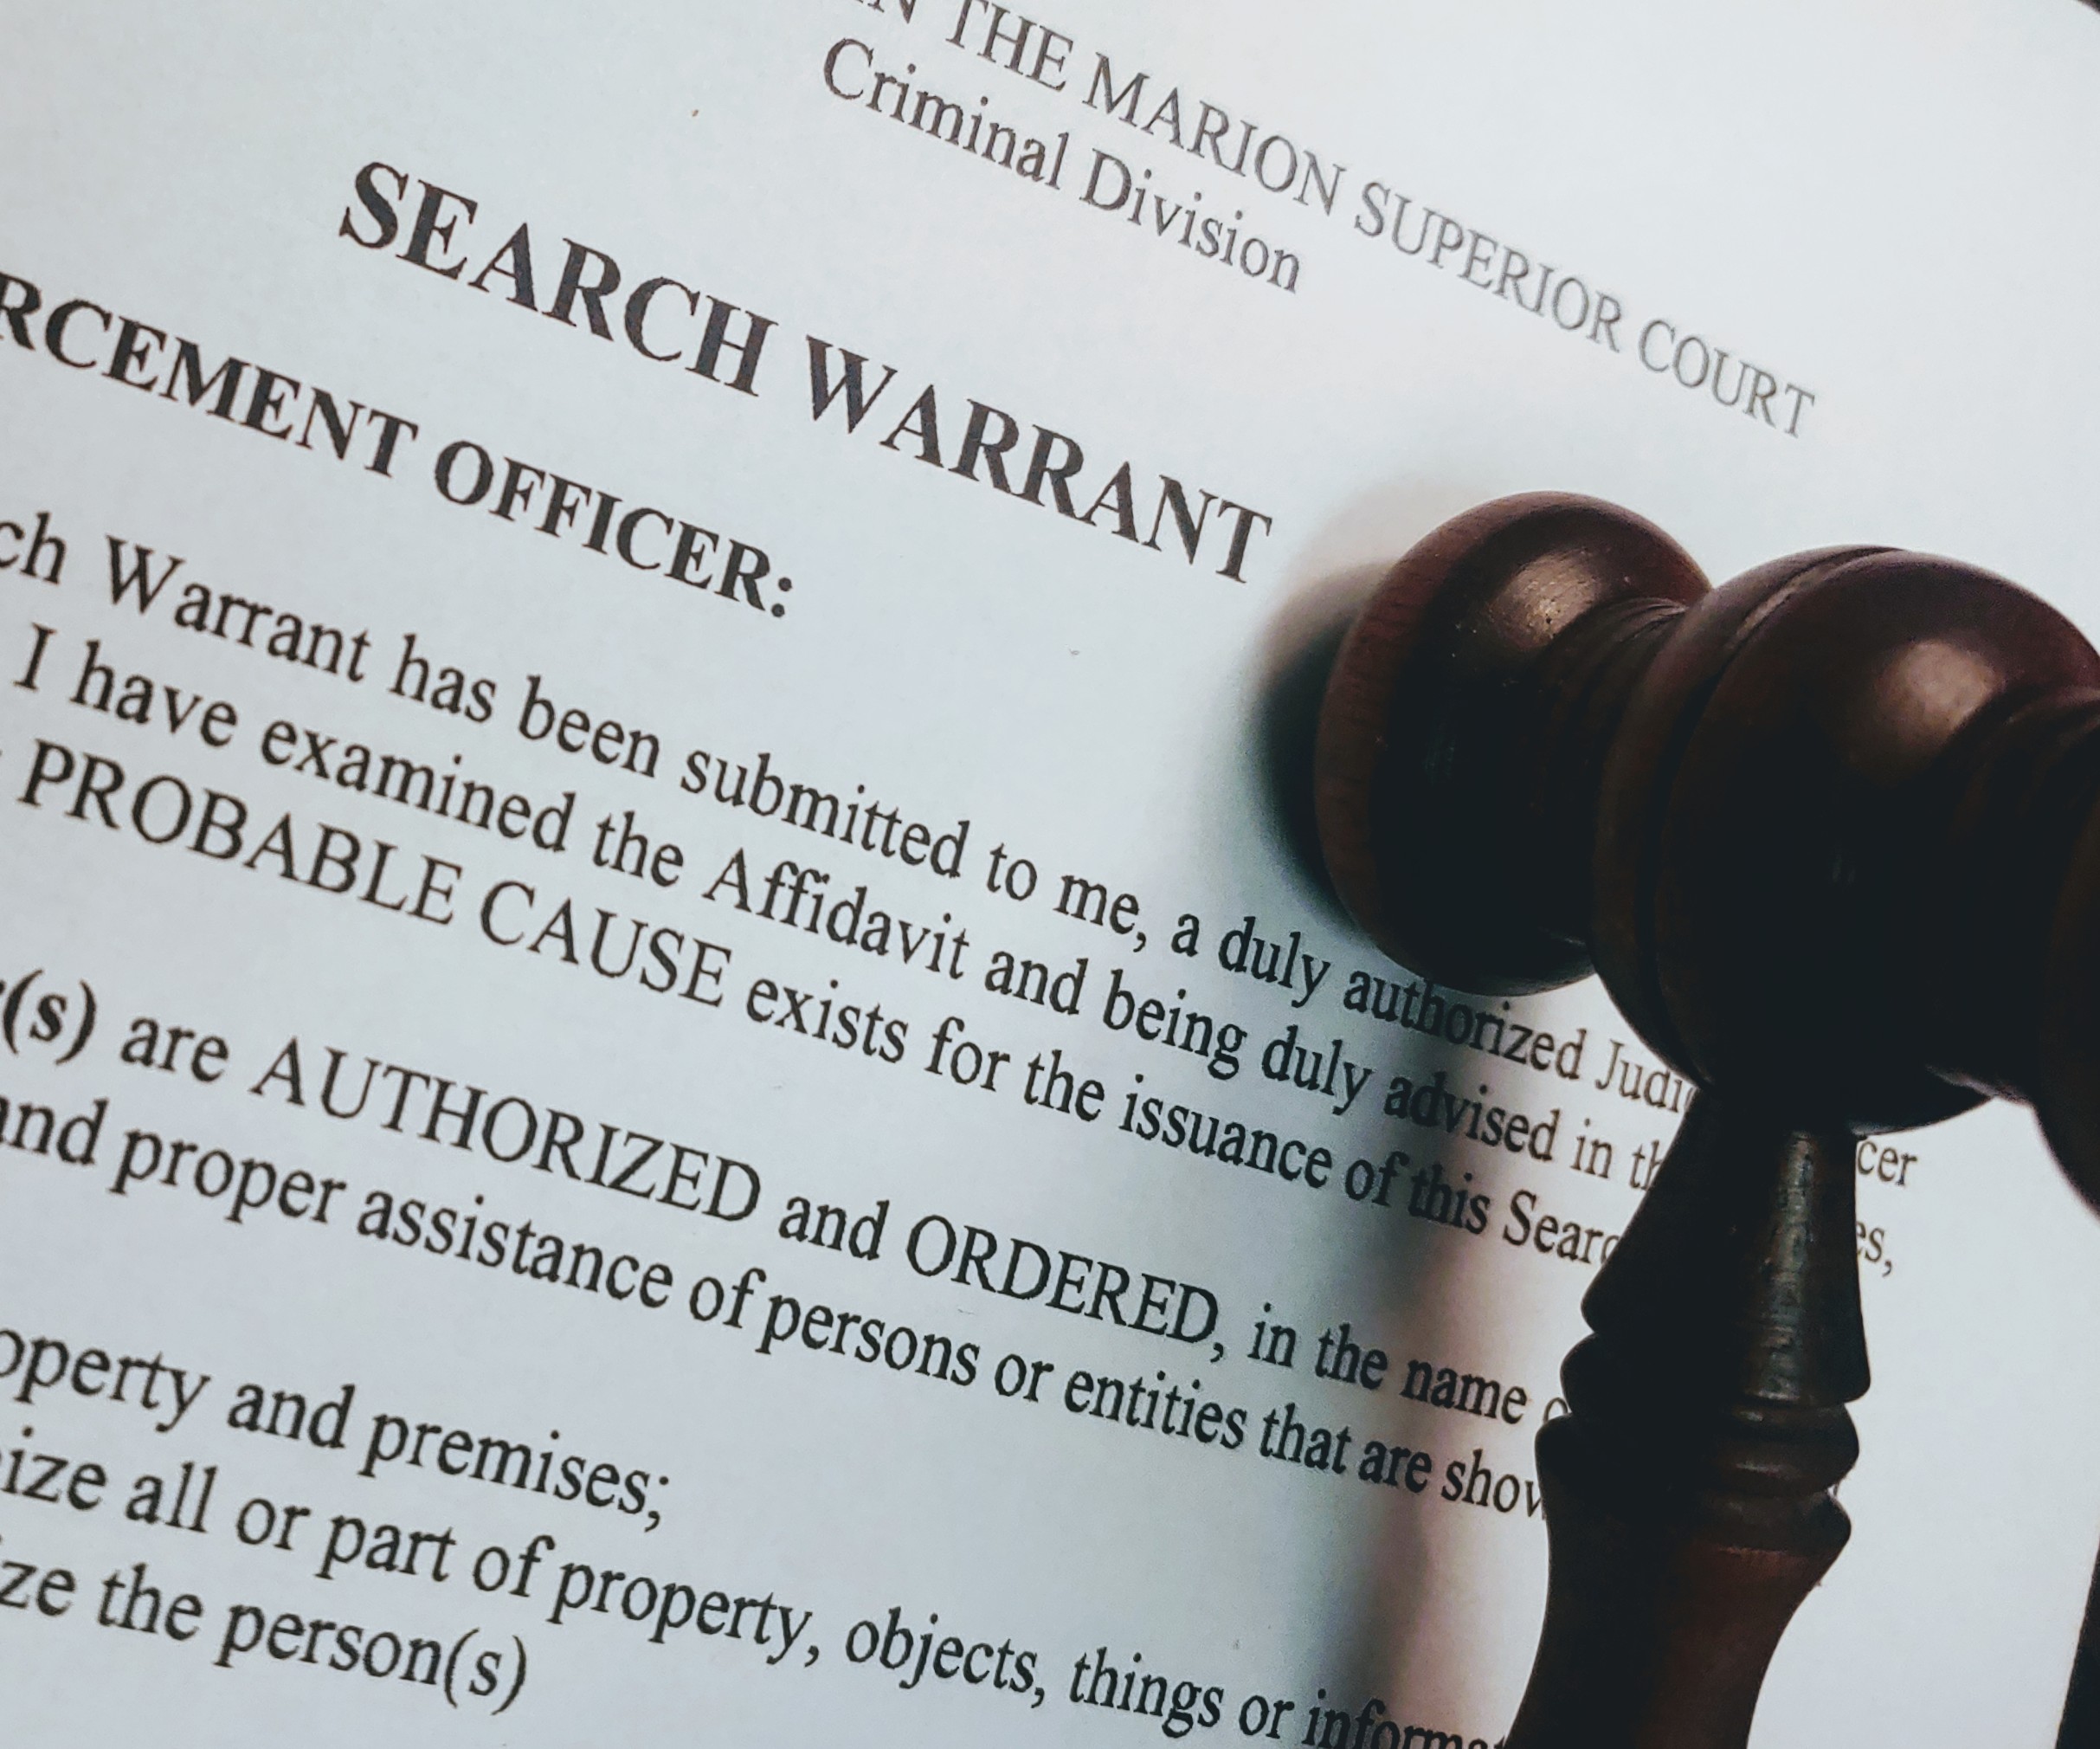 why police need a search warrant to conceal contraband